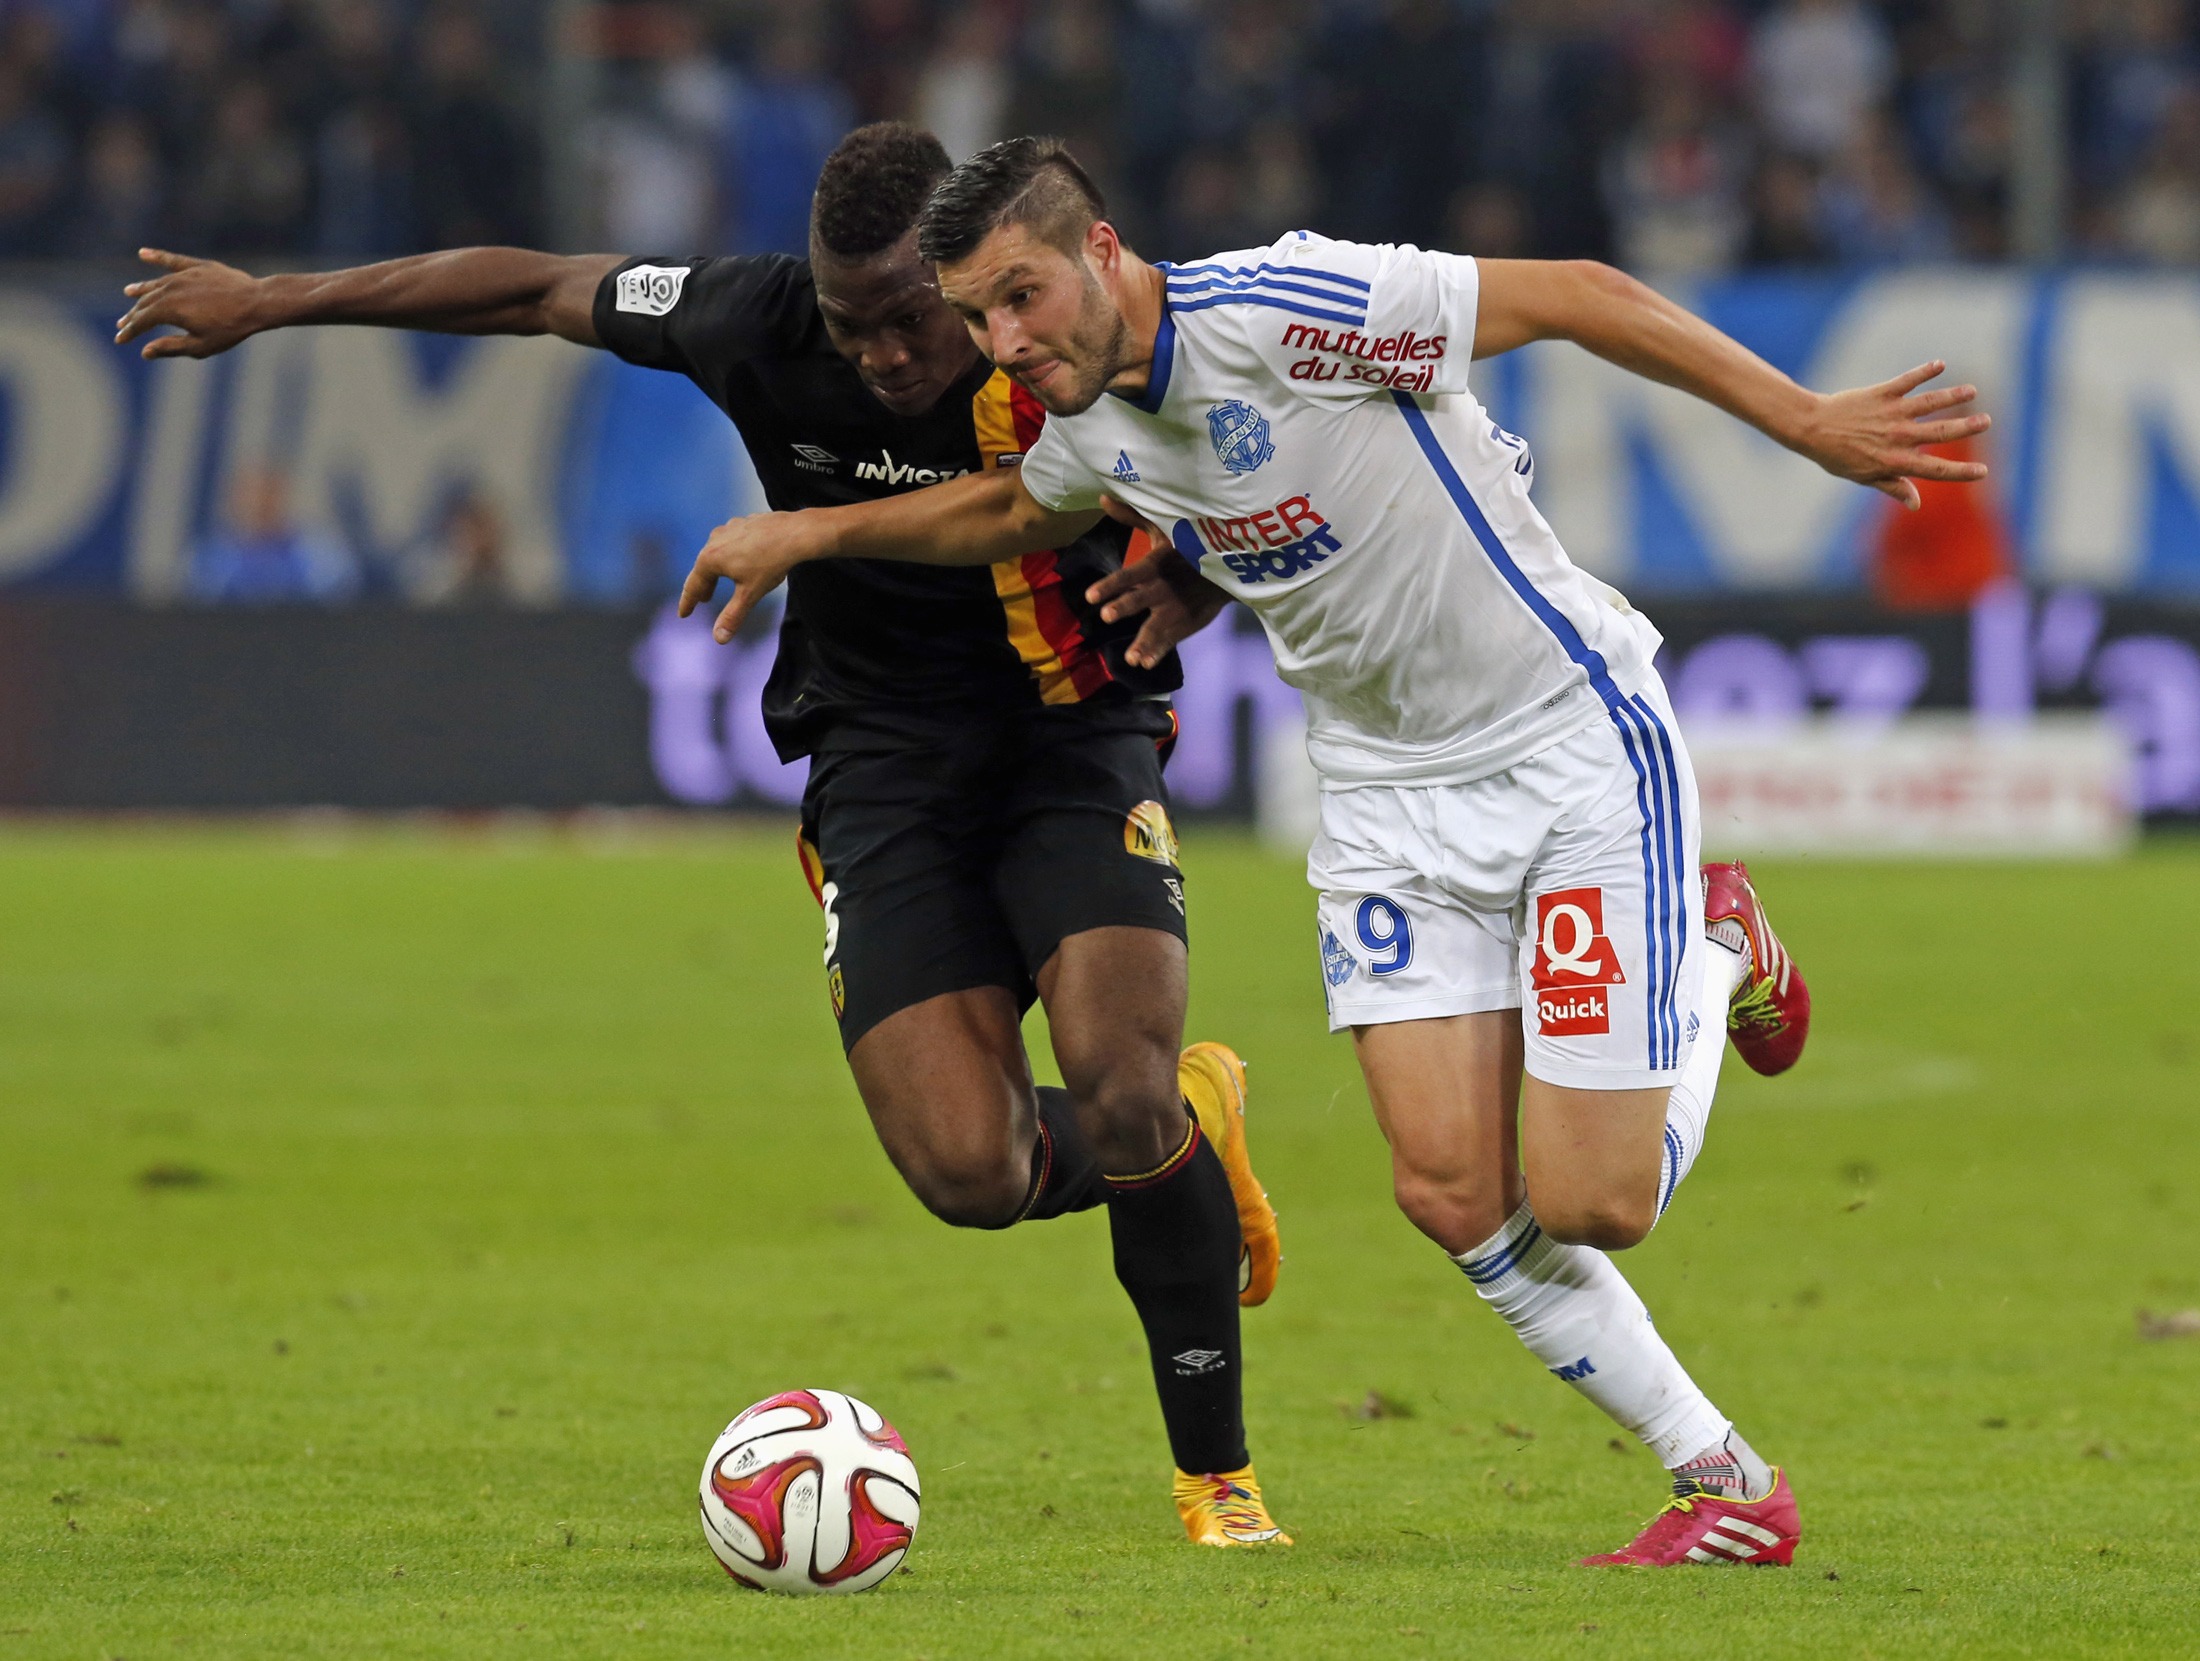 Olympique Marseille's Gignac challenges Cavare of RC Lens during their French Ligue 1 soccer match at the Velodrome stadium in Marseille